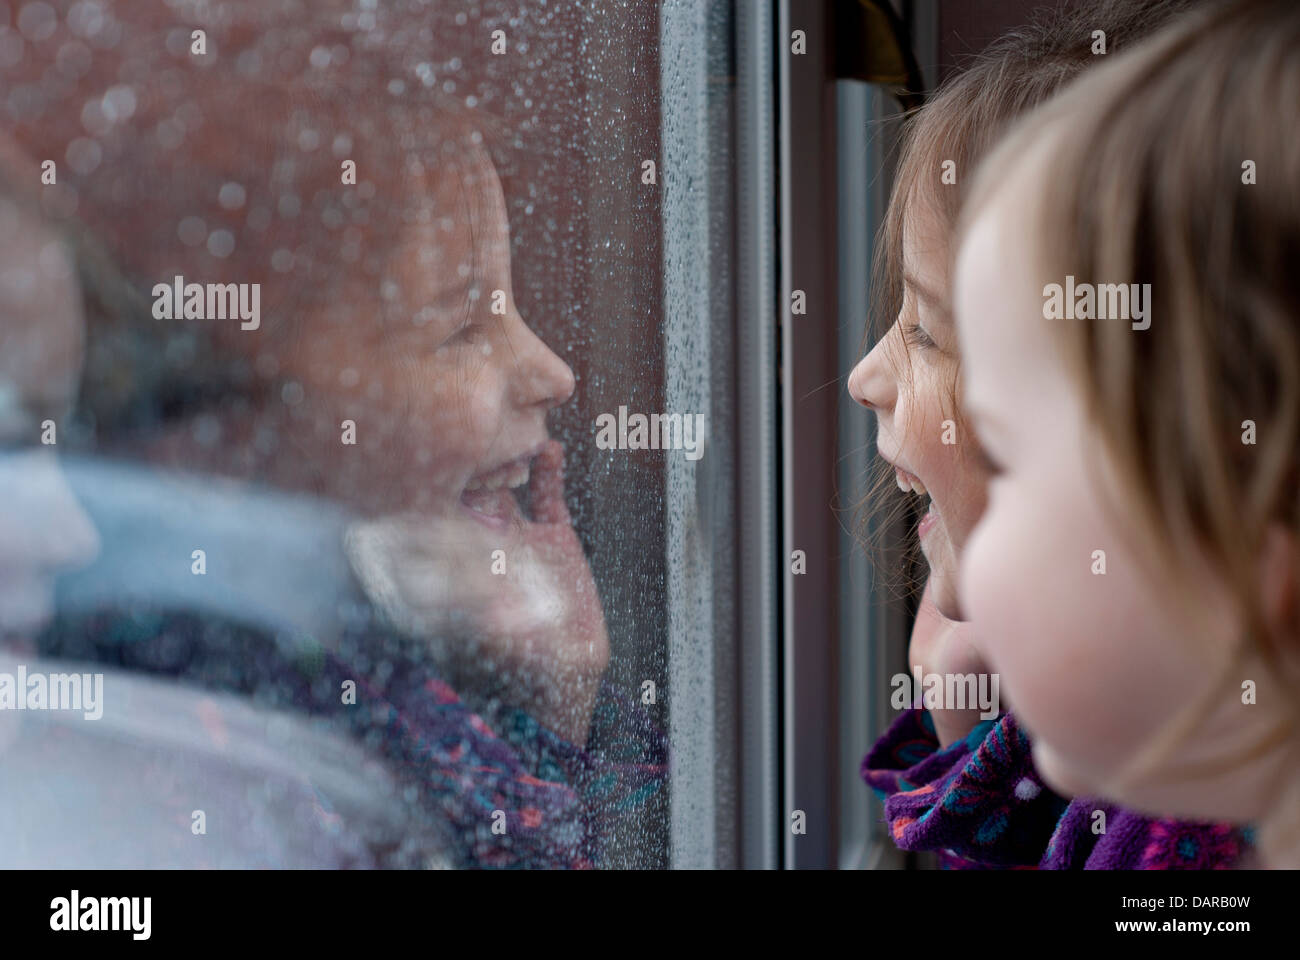 Girls looking out the window on a rainy day Stock Photo